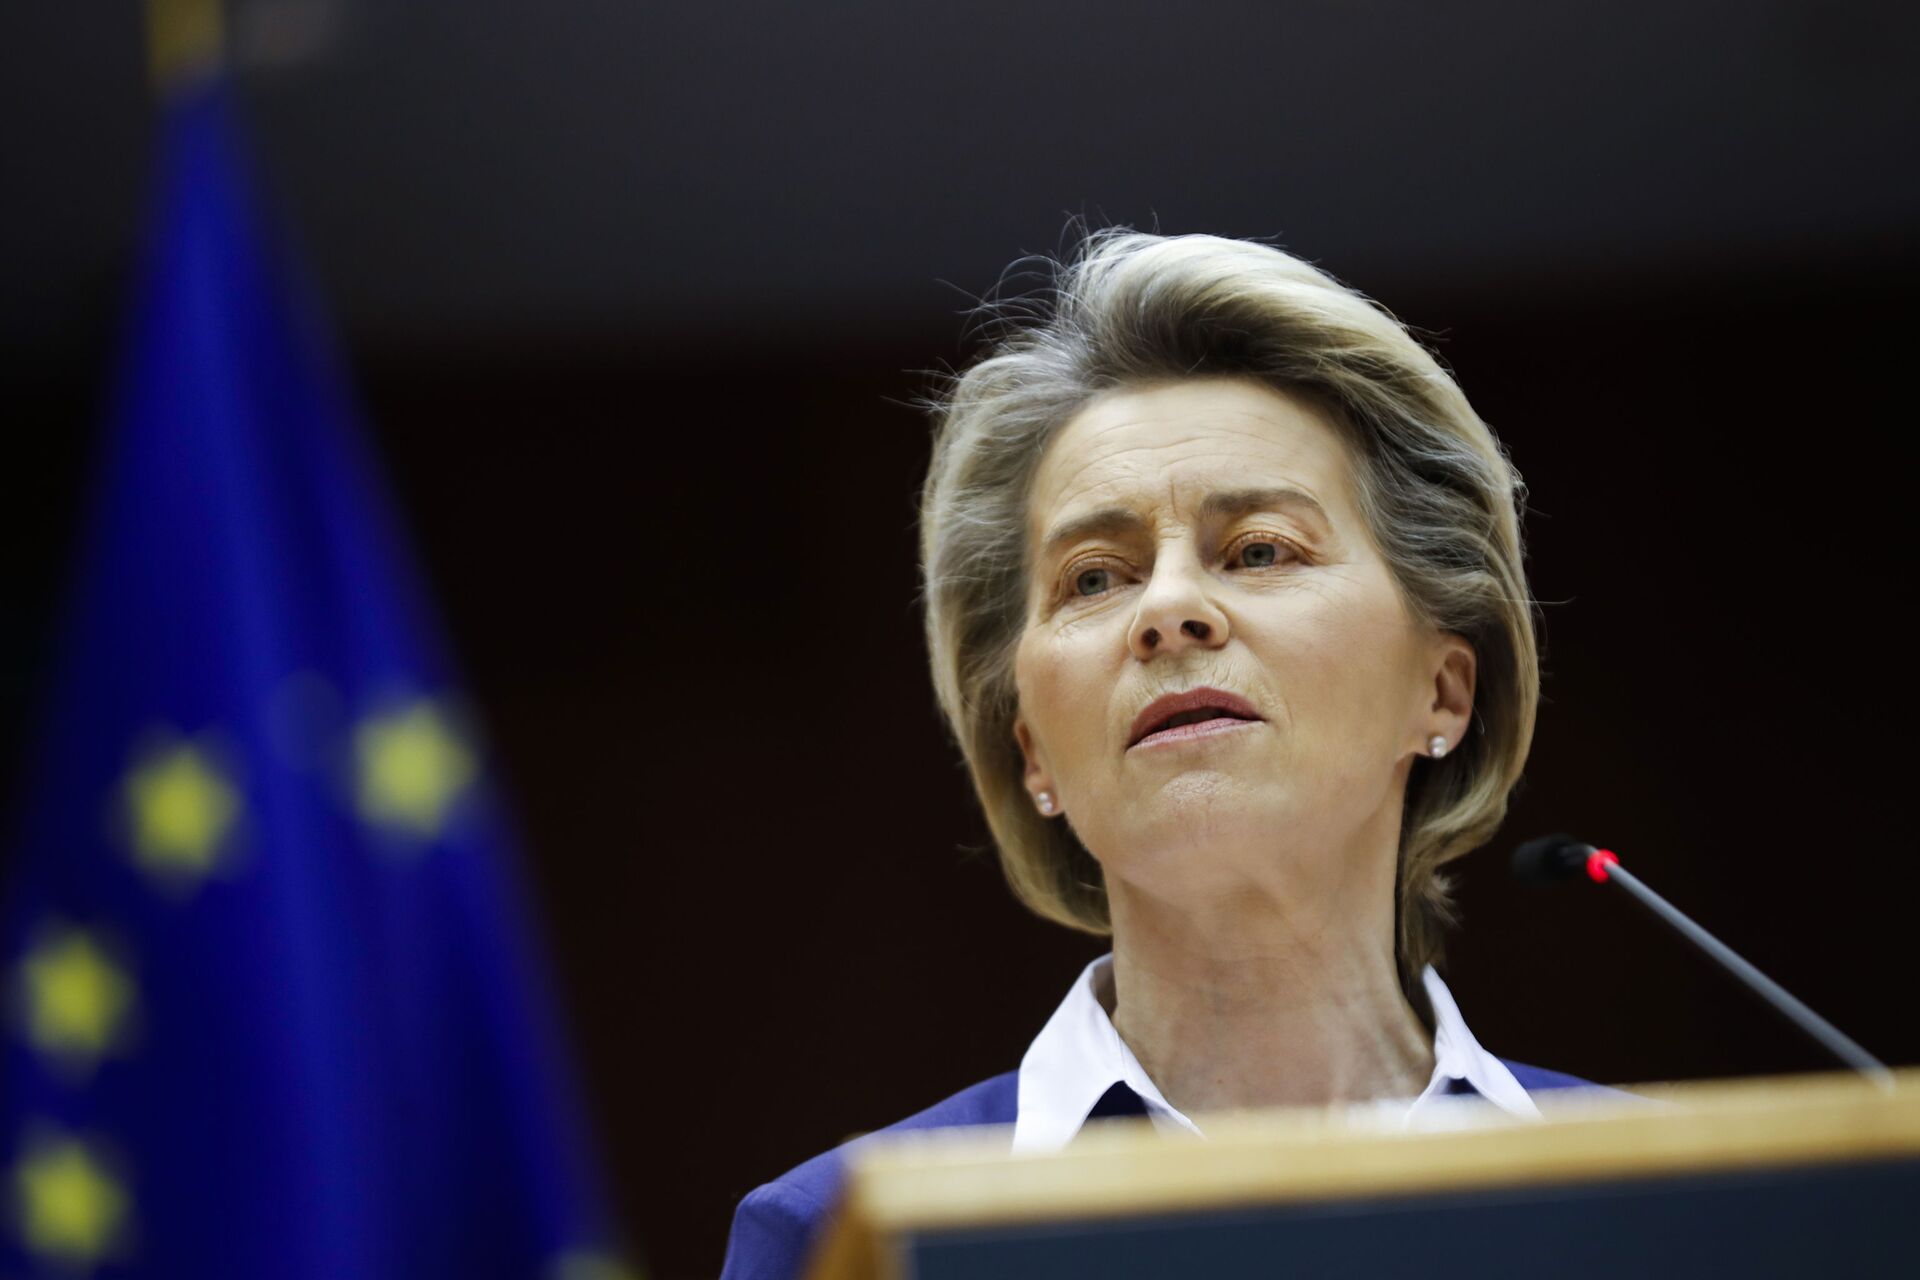 European Commission President Ursula Von Der Leyen addresses European lawmakers during a plenary session on the inauguration of the new President of the United States and the current political situation, at the European Parliament in Brussels, Wednesday, Jan. 20, 2021 - Sputnik International, 1920, 19.07.2022